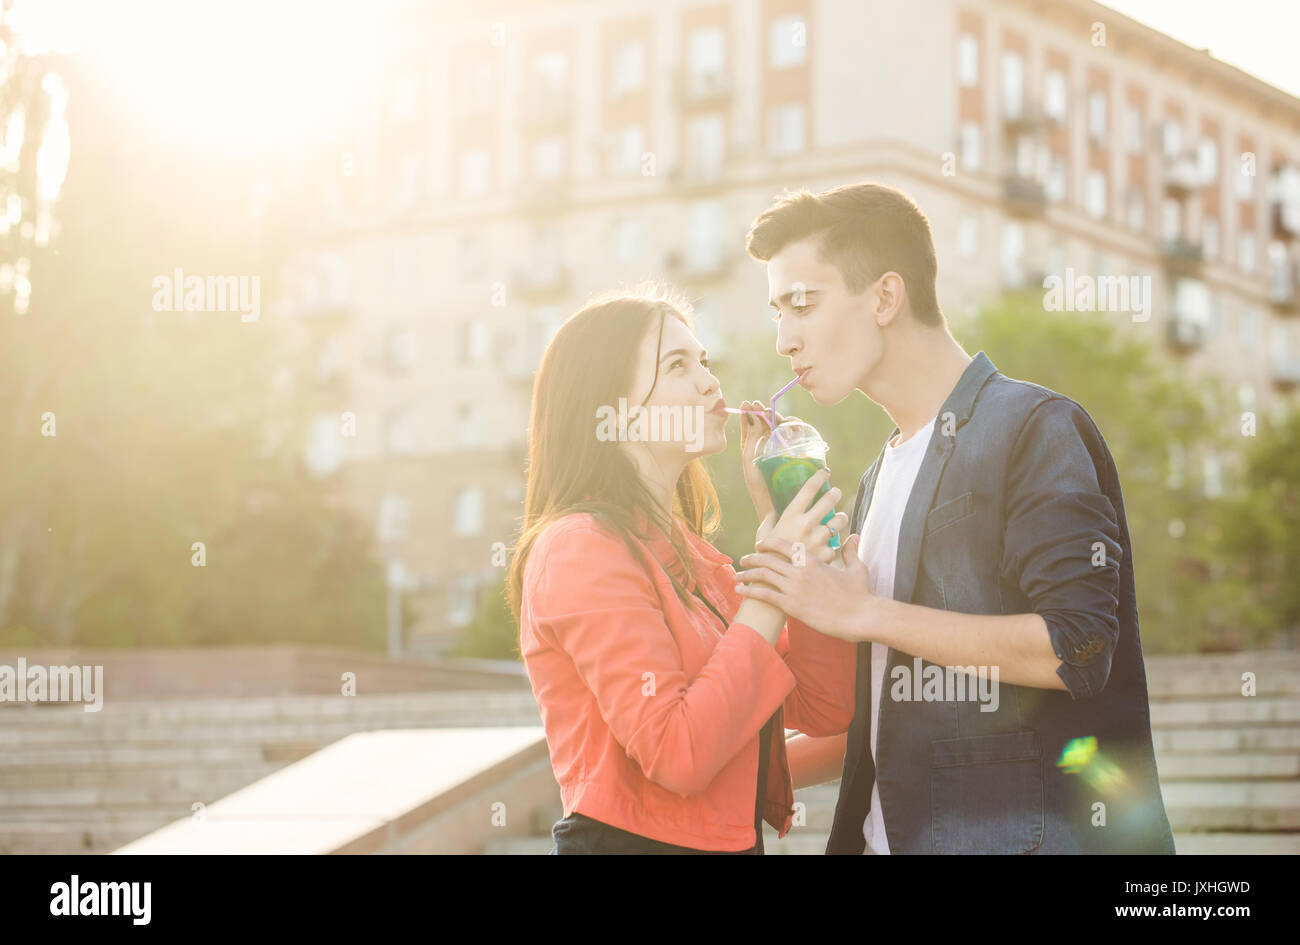 Teens drink fresh fruit from the cups. They drink from one glass. A couple in love on a date. Romance of first love. Stock Photo